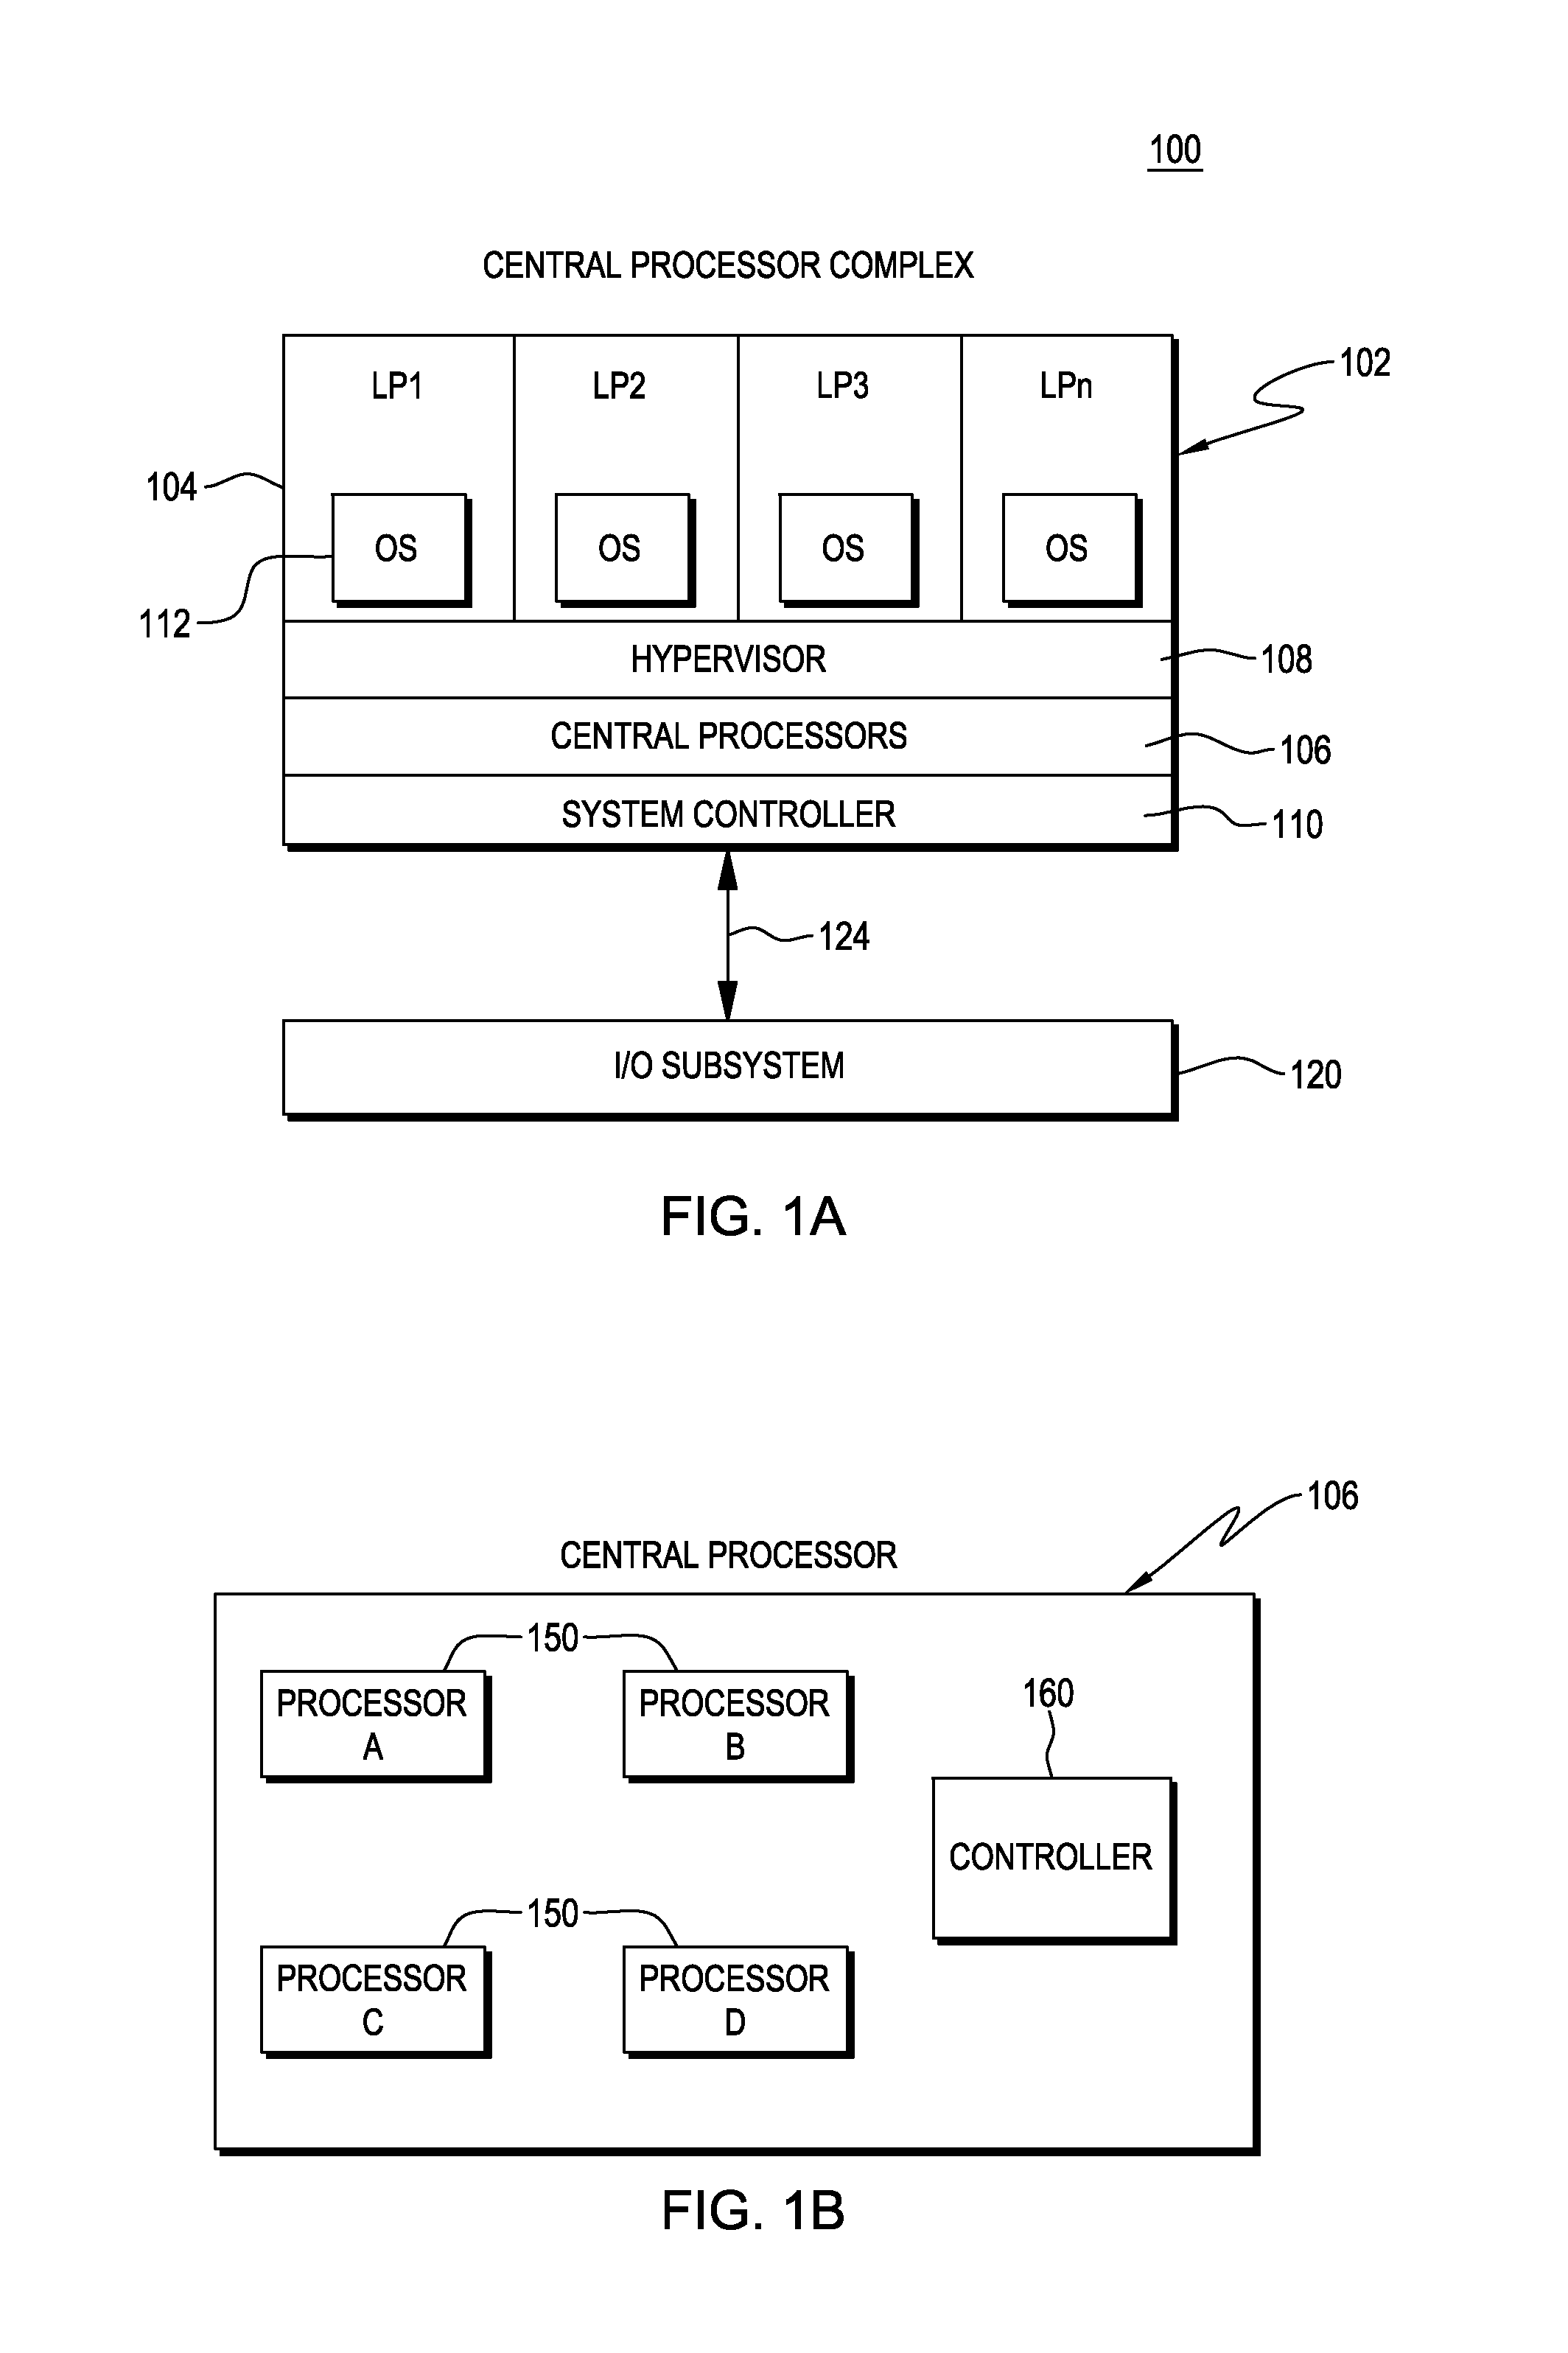 Management of threads within a computing environment